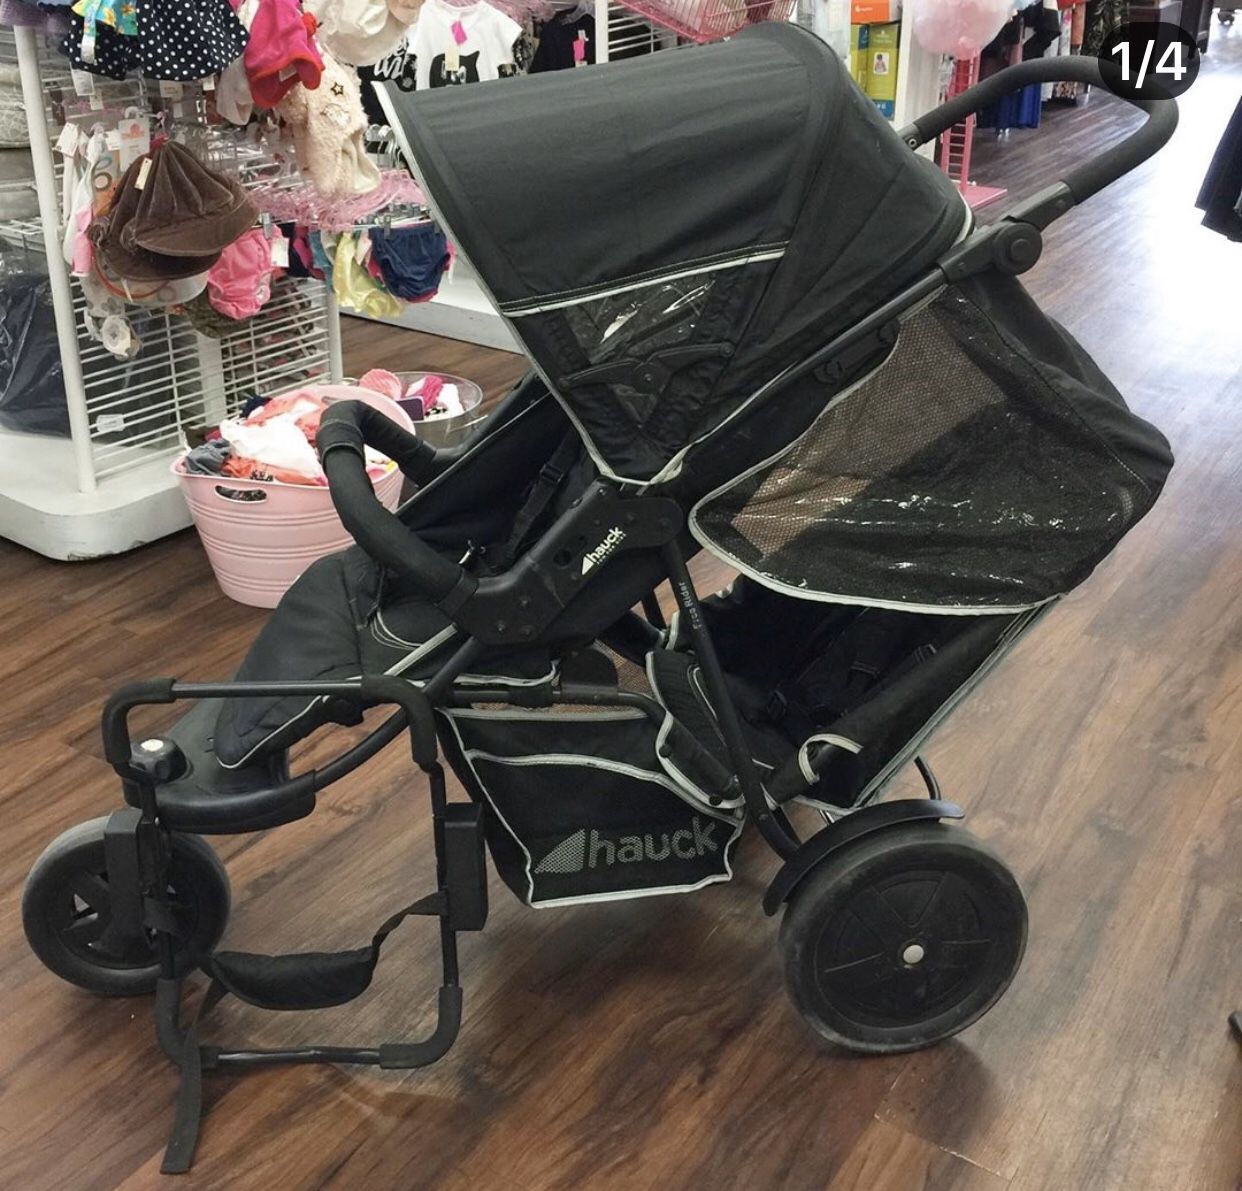 Hauck Freerider Tandem Jogging Stroller with infant car seat adapter retails for $440!